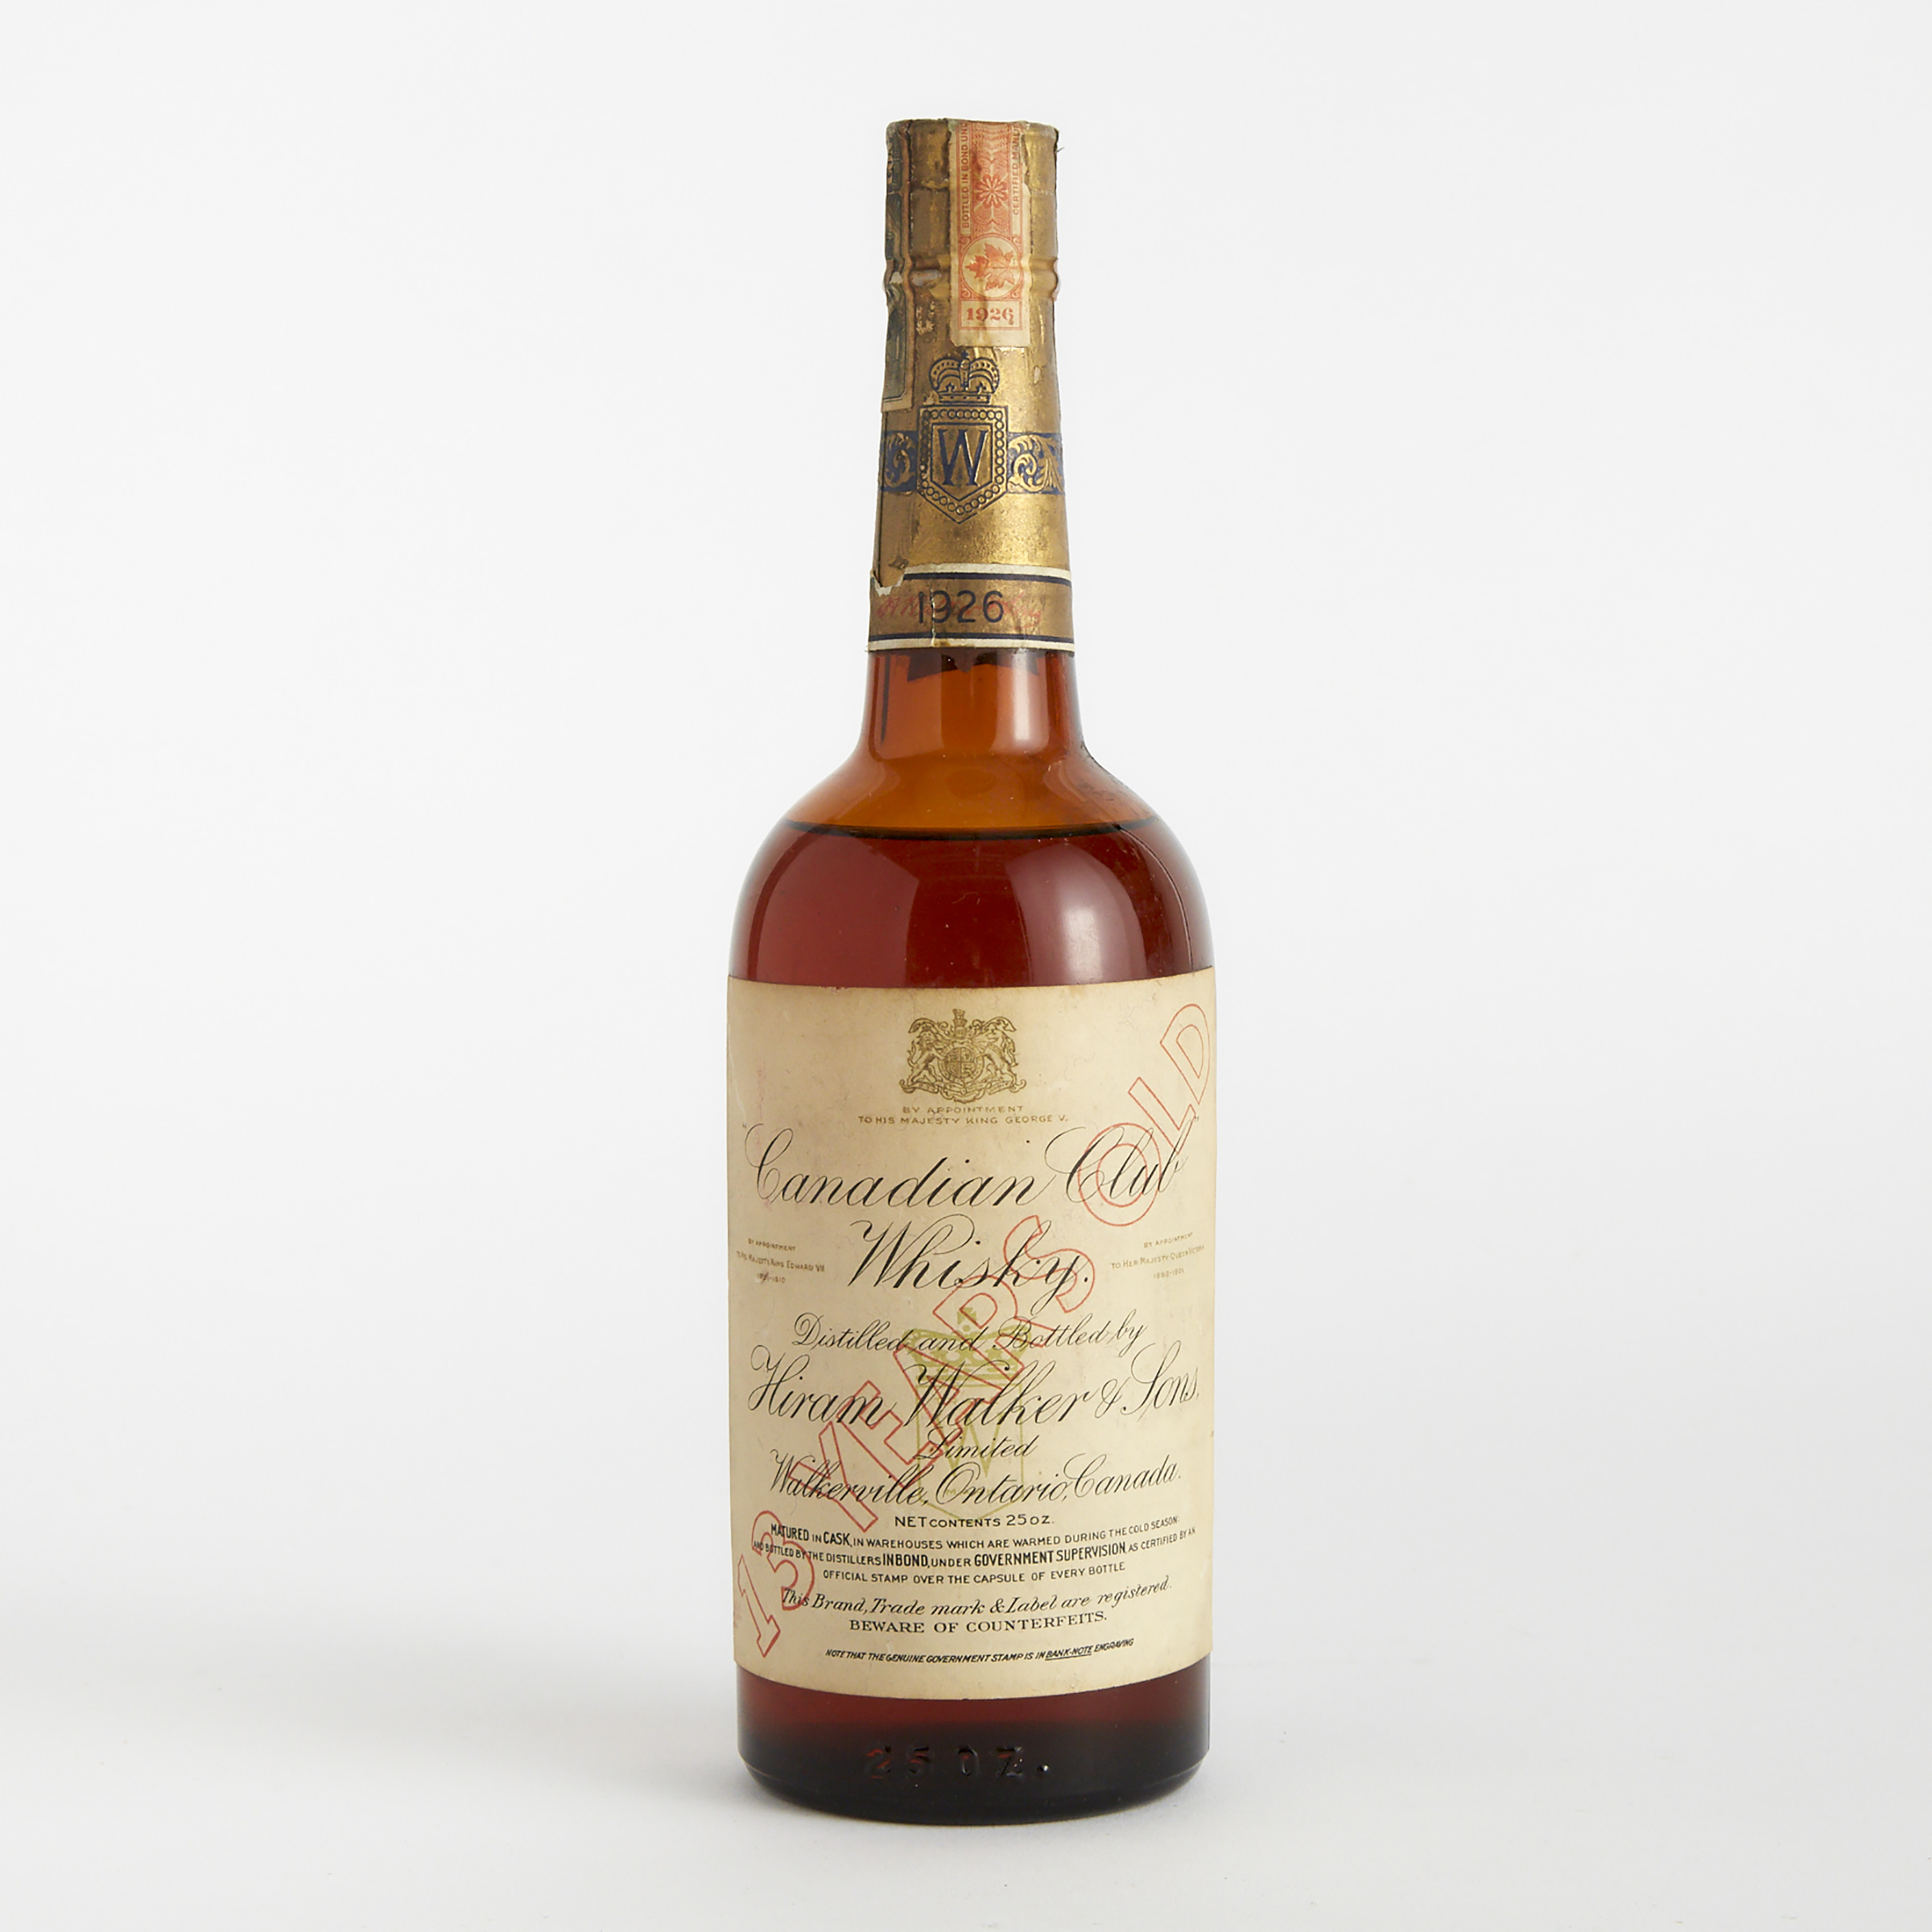 CANADIAN CLUB WHISKY 13 YEARS (ONE 25 OUNCES)